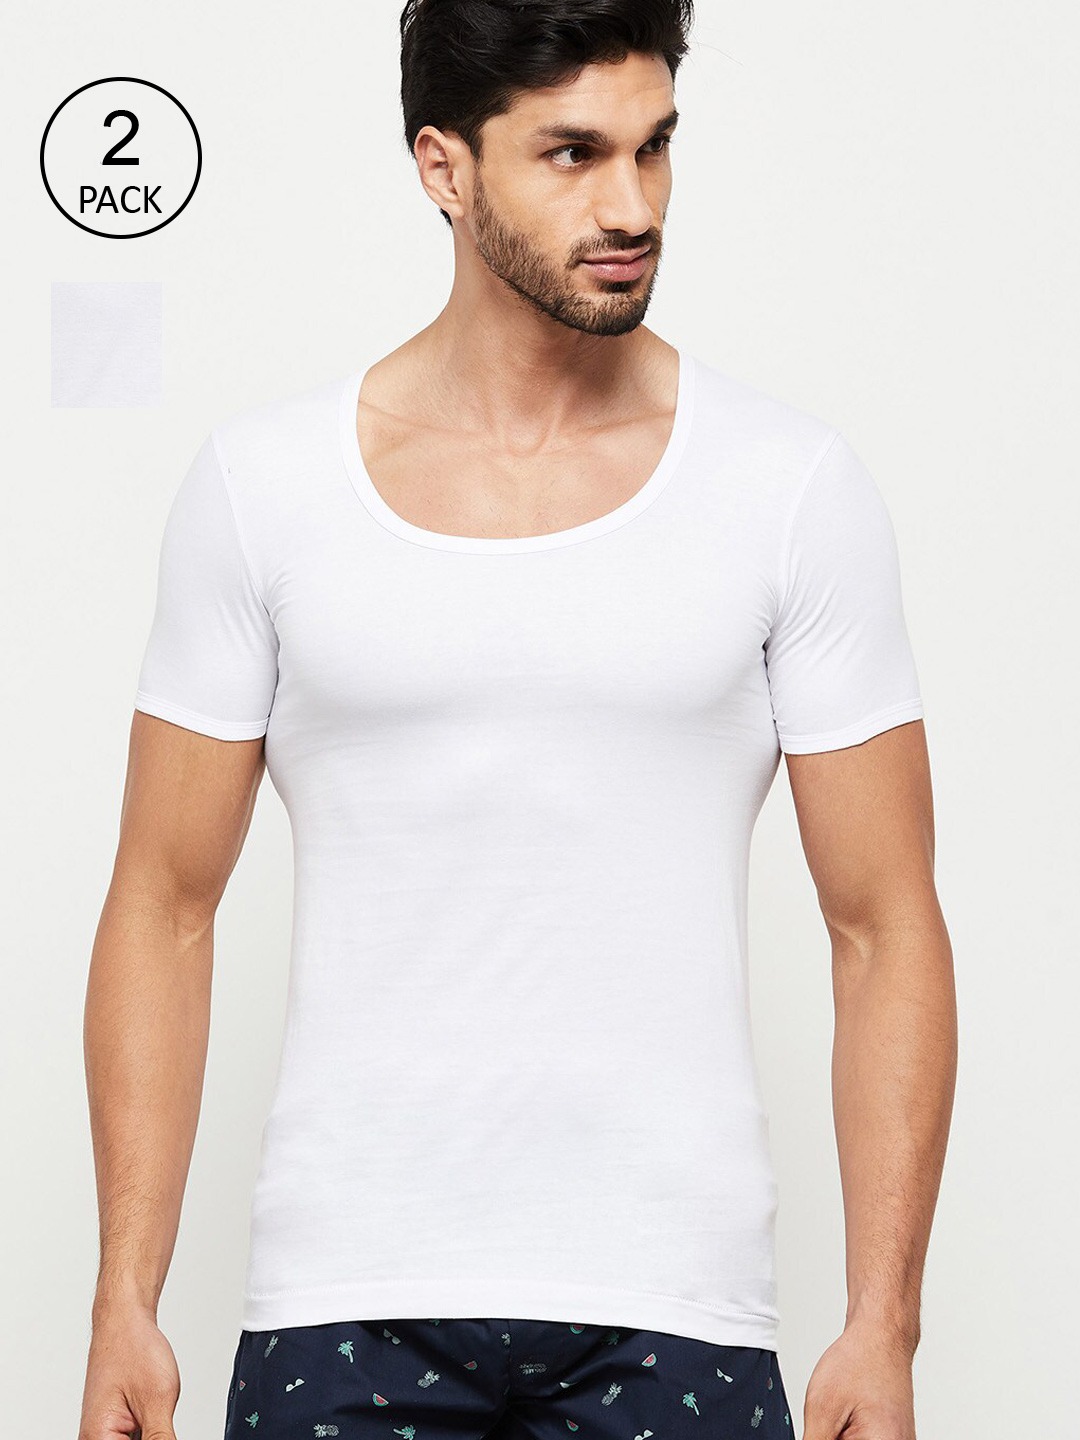 Clothing Innerwear Vests | max Men Pack Of 2 White Solid Pure Cotton Innerwear Vests - KD14338